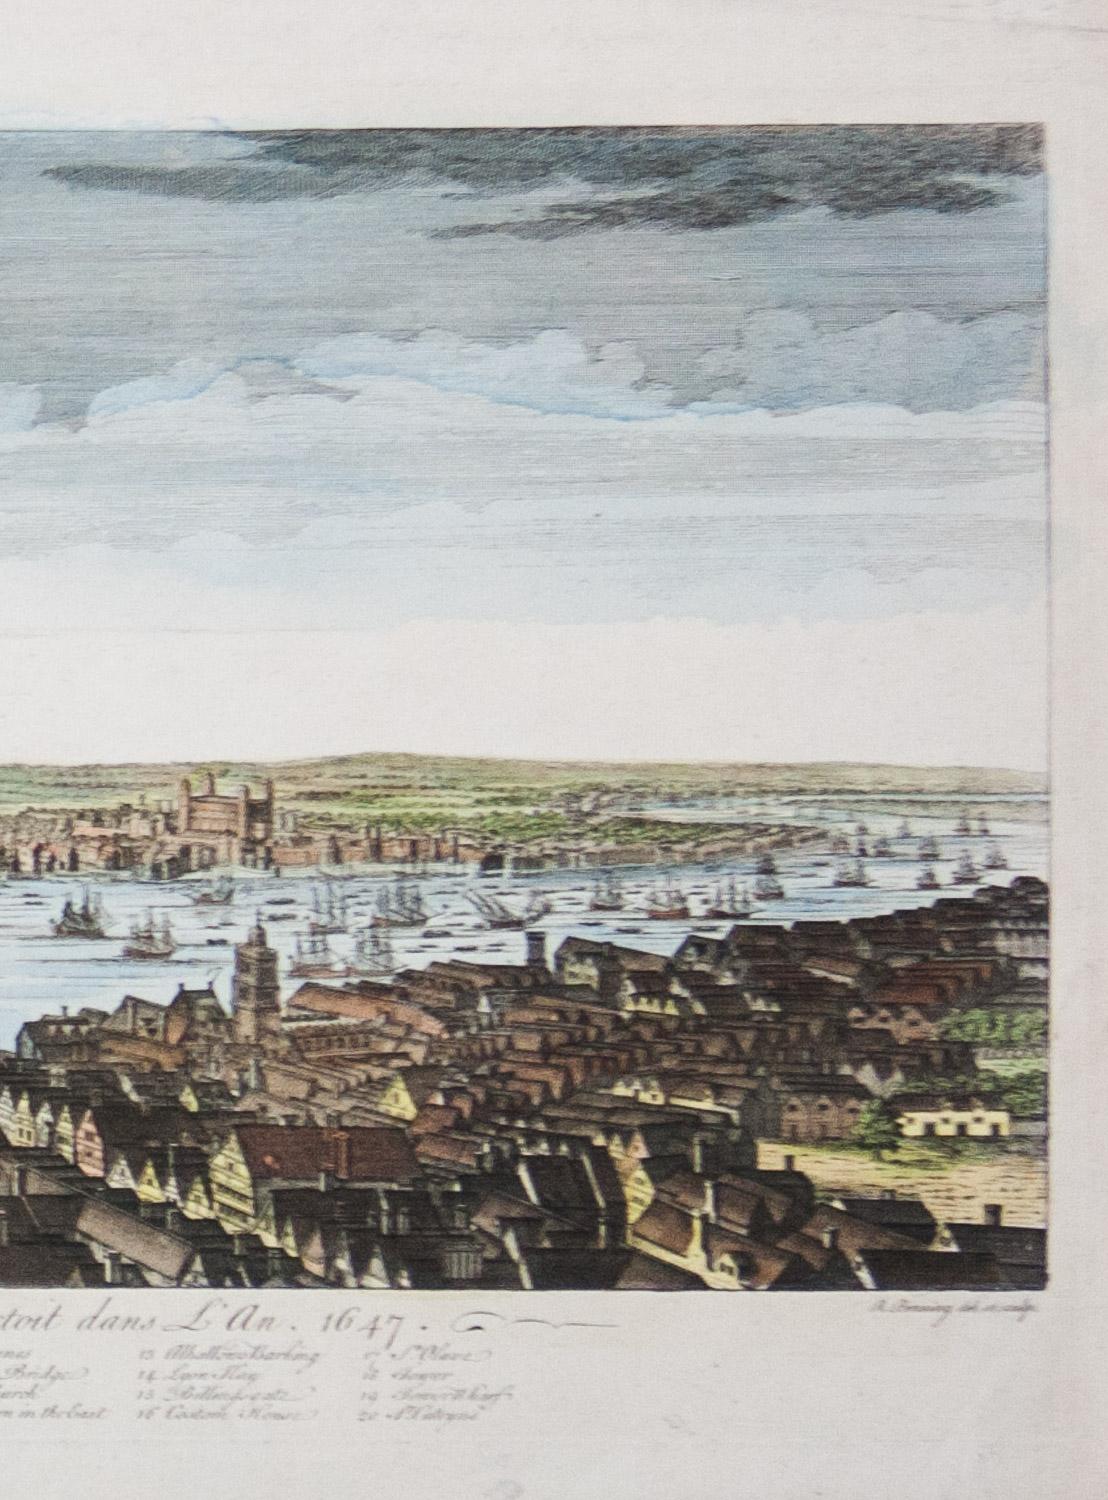 A View of London as it was in the Year 1647  is a hand colored copper engraving published by the well known British publisher and engraver John Boydell  (1720-1804) and engraved by R.Benning sold at Cheapside London 1756.  Panoramic view on two